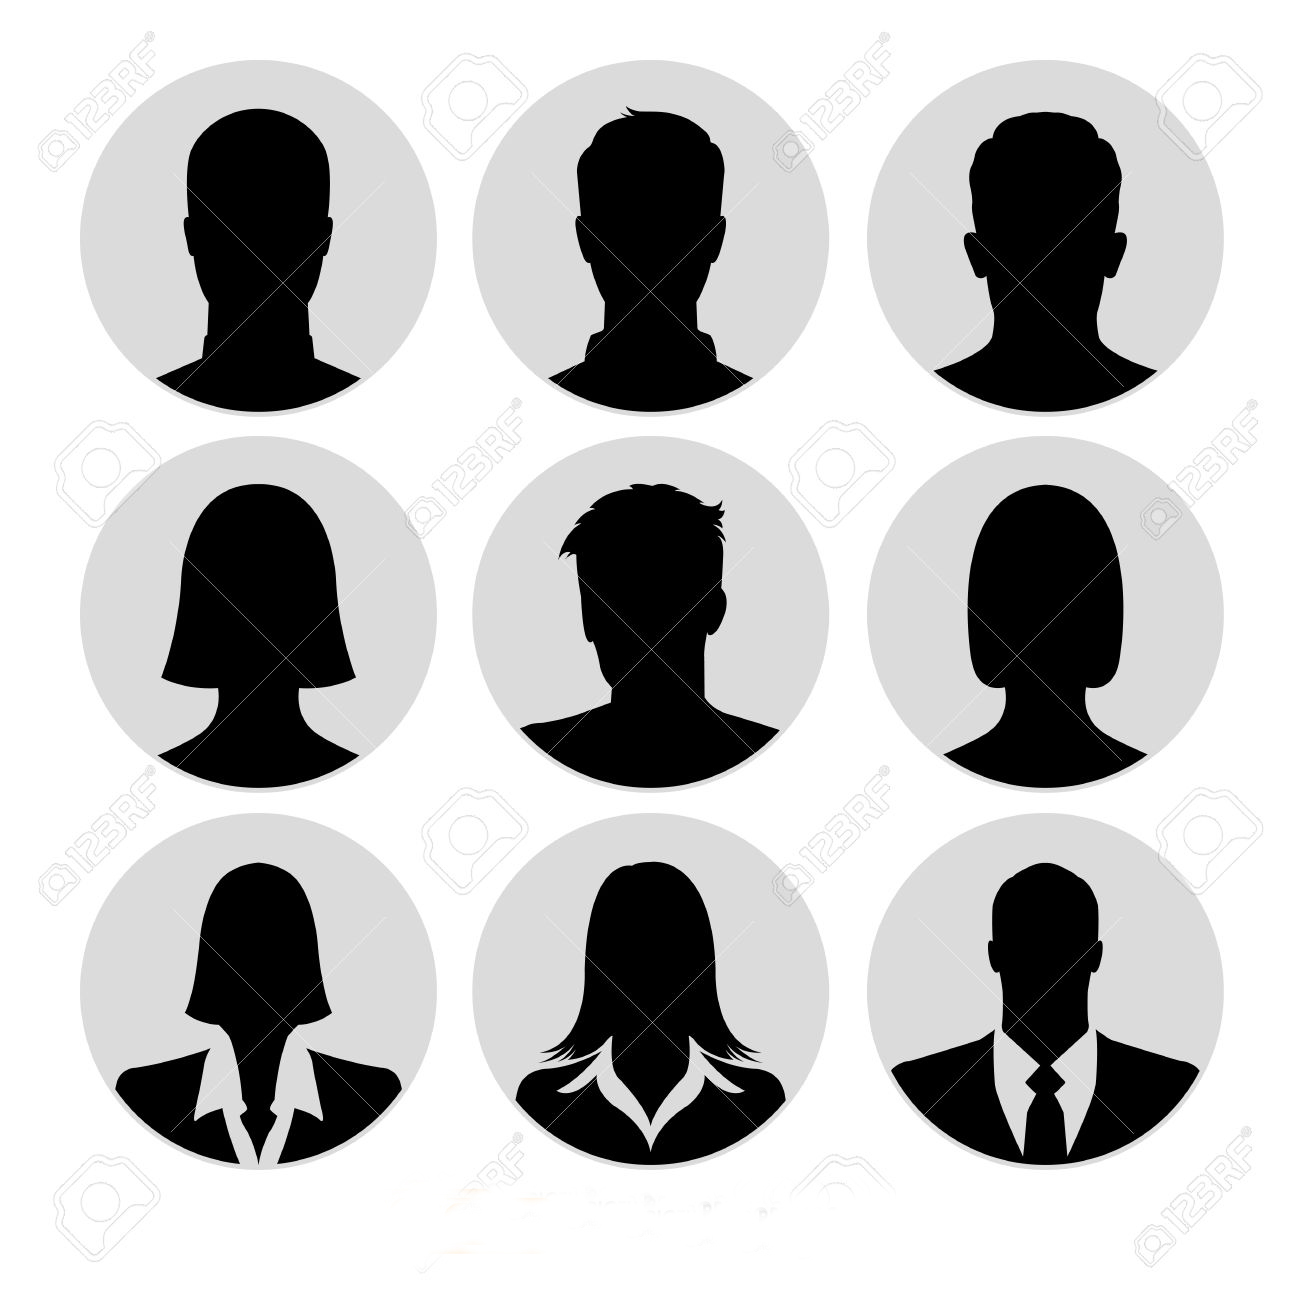 Avatar profile picture icon set including male, female & businesspeople